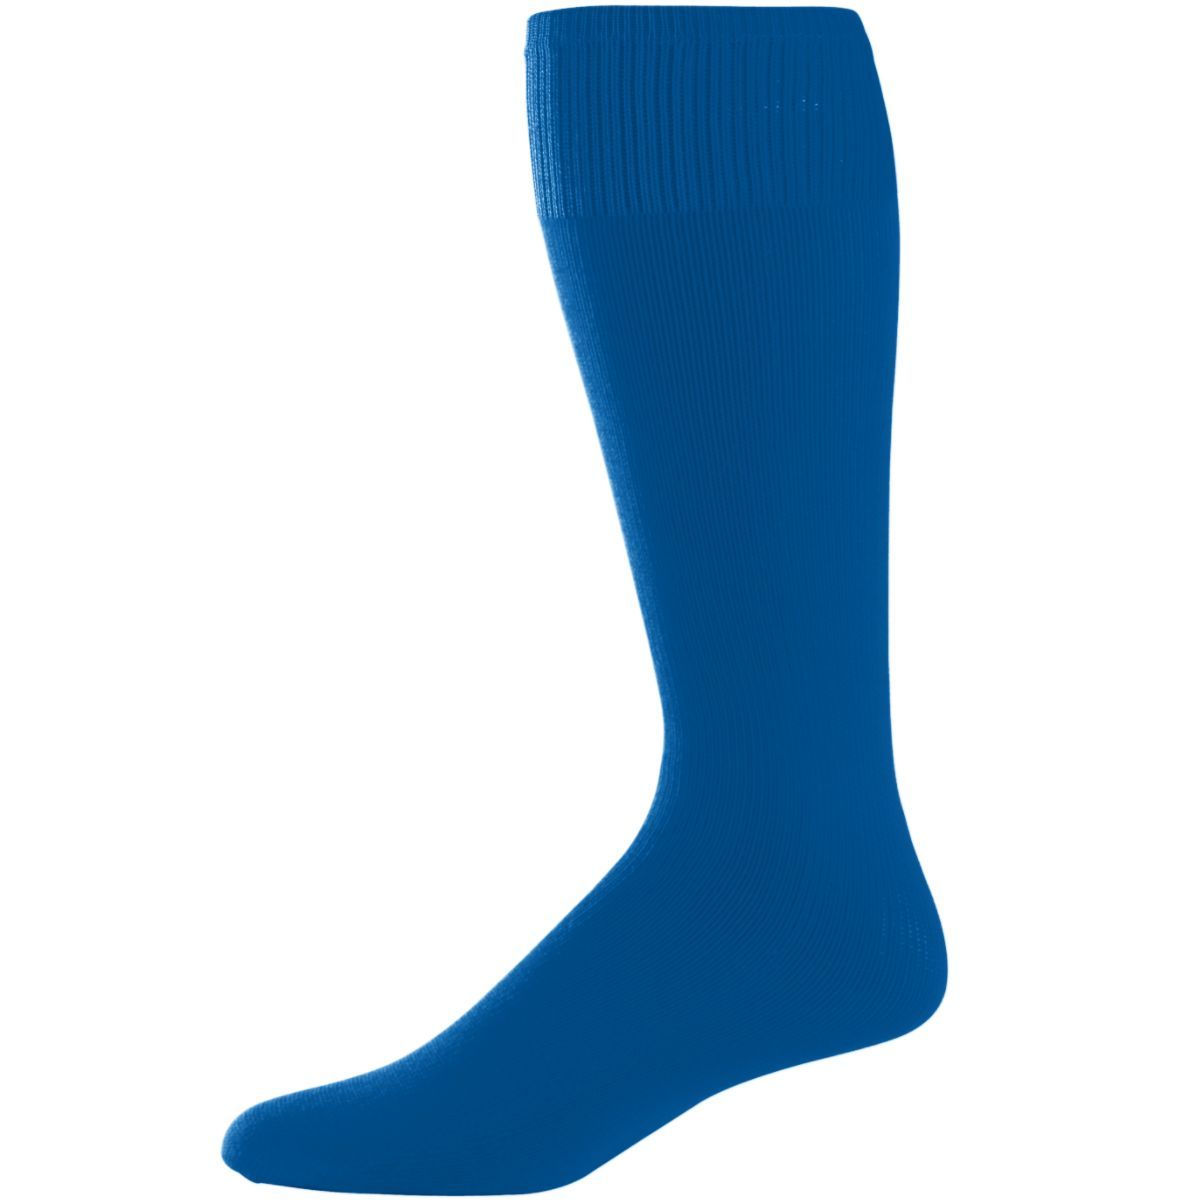 Augusta Sportswear Game Socks in Royal  -Part of the Accessories, Augusta-Products, Accessories-Socks product lines at KanaleyCreations.com